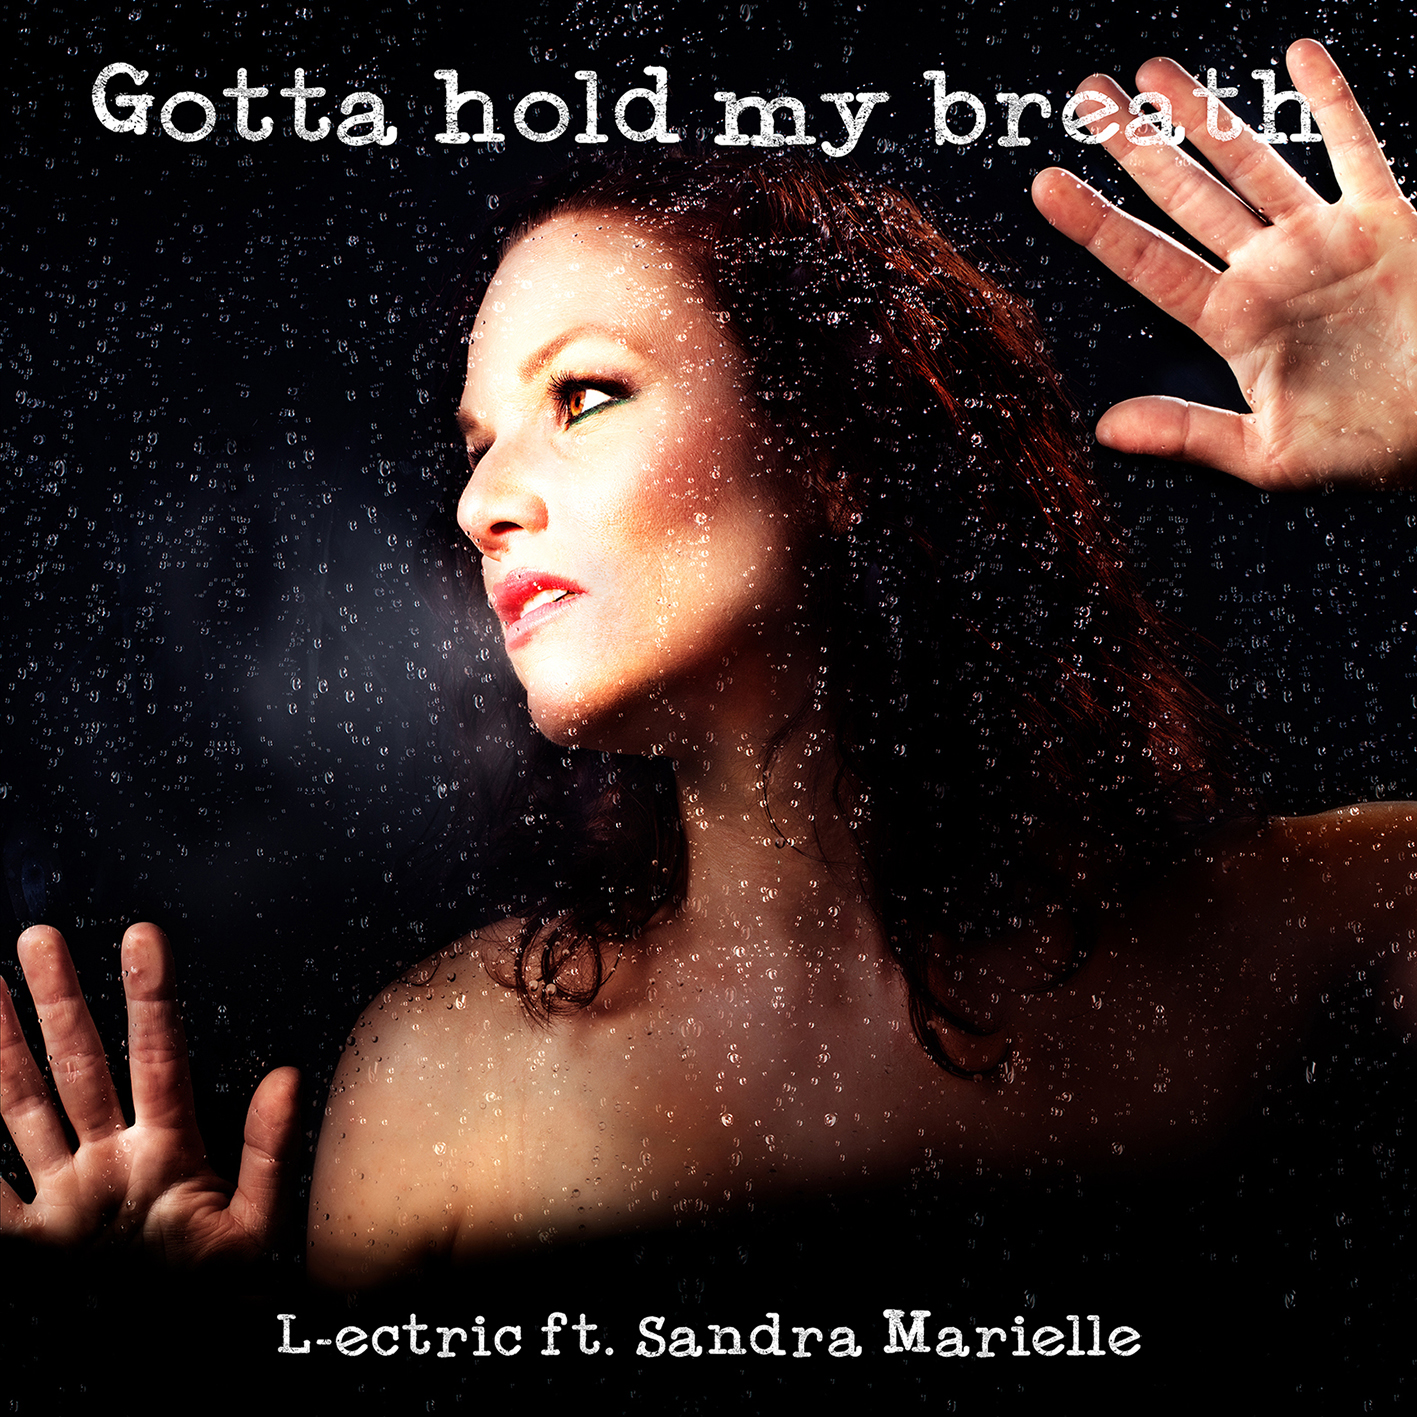 Song cover - L-ectric ft. Sandra Marielle